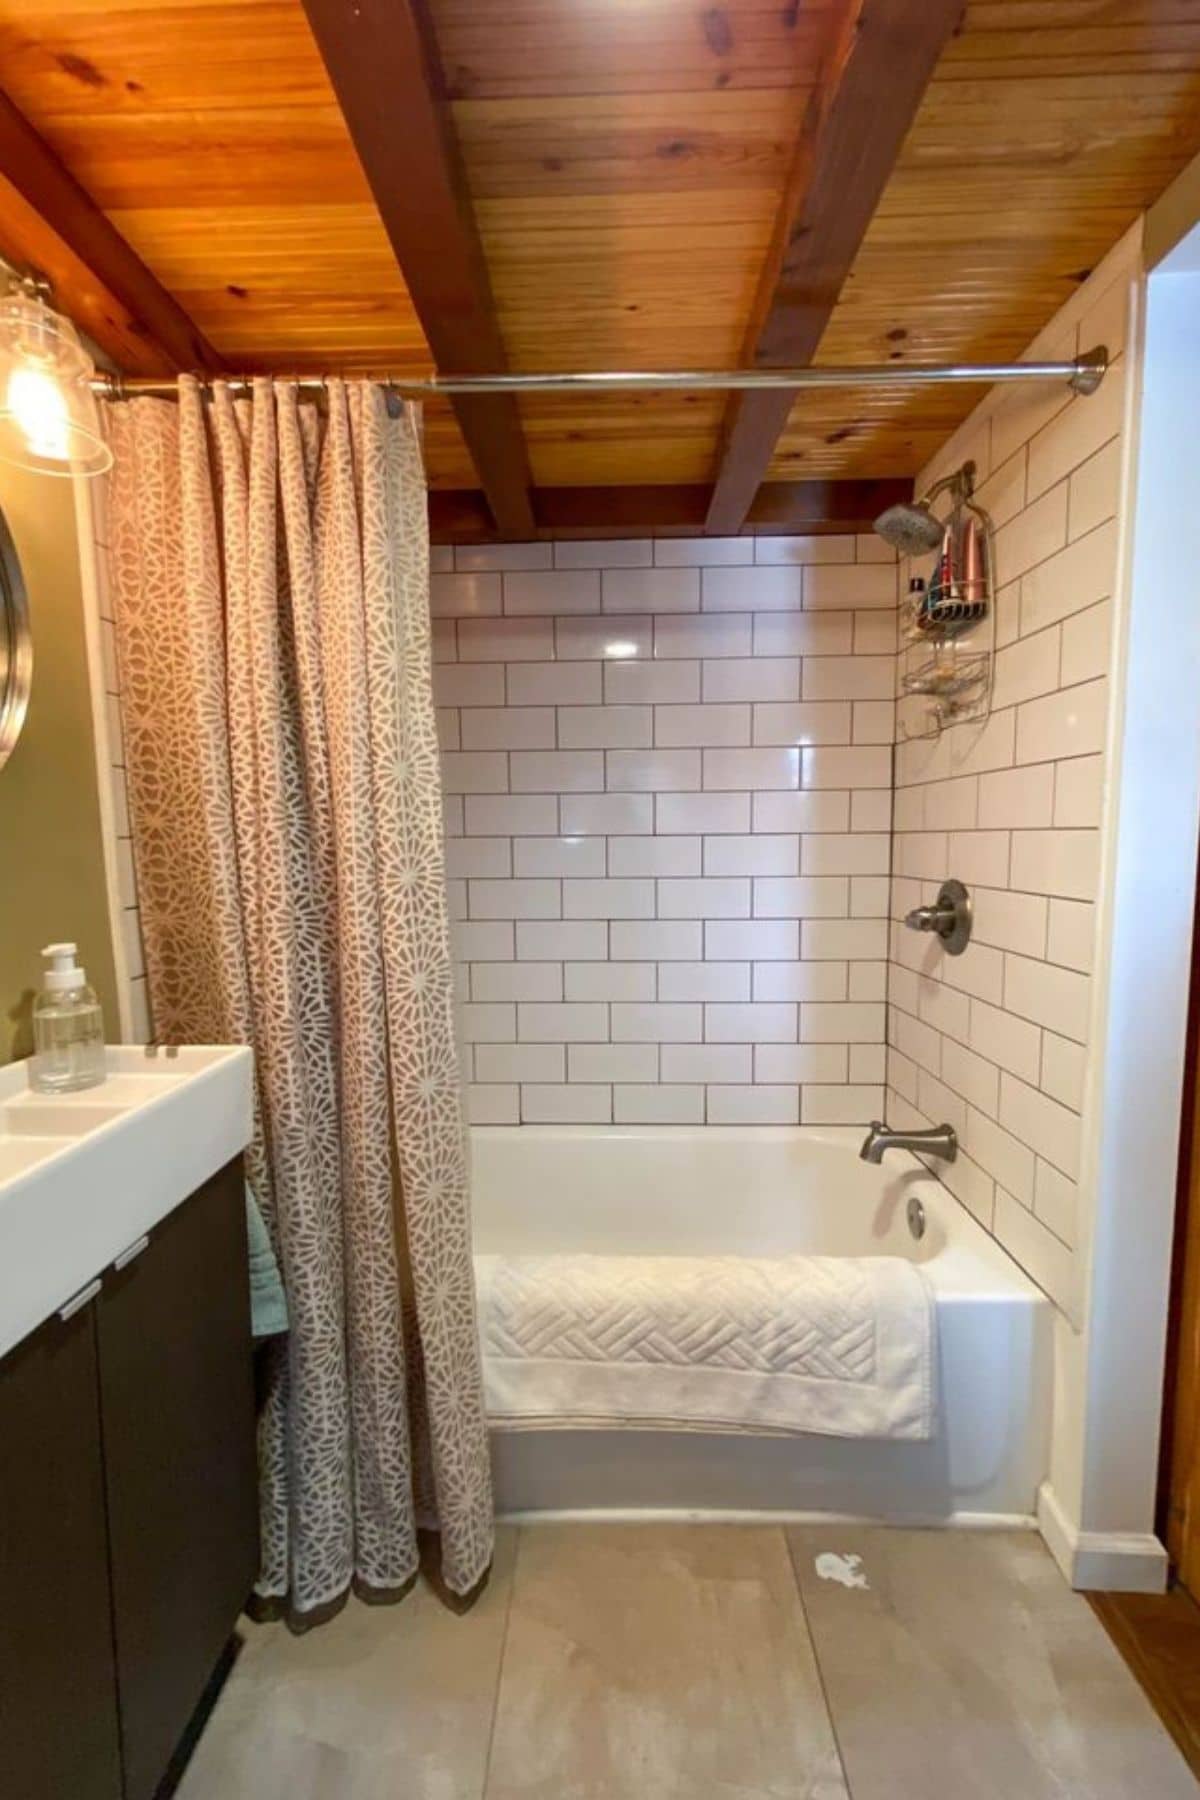 Bathtub shower with subway tile and tan curtain